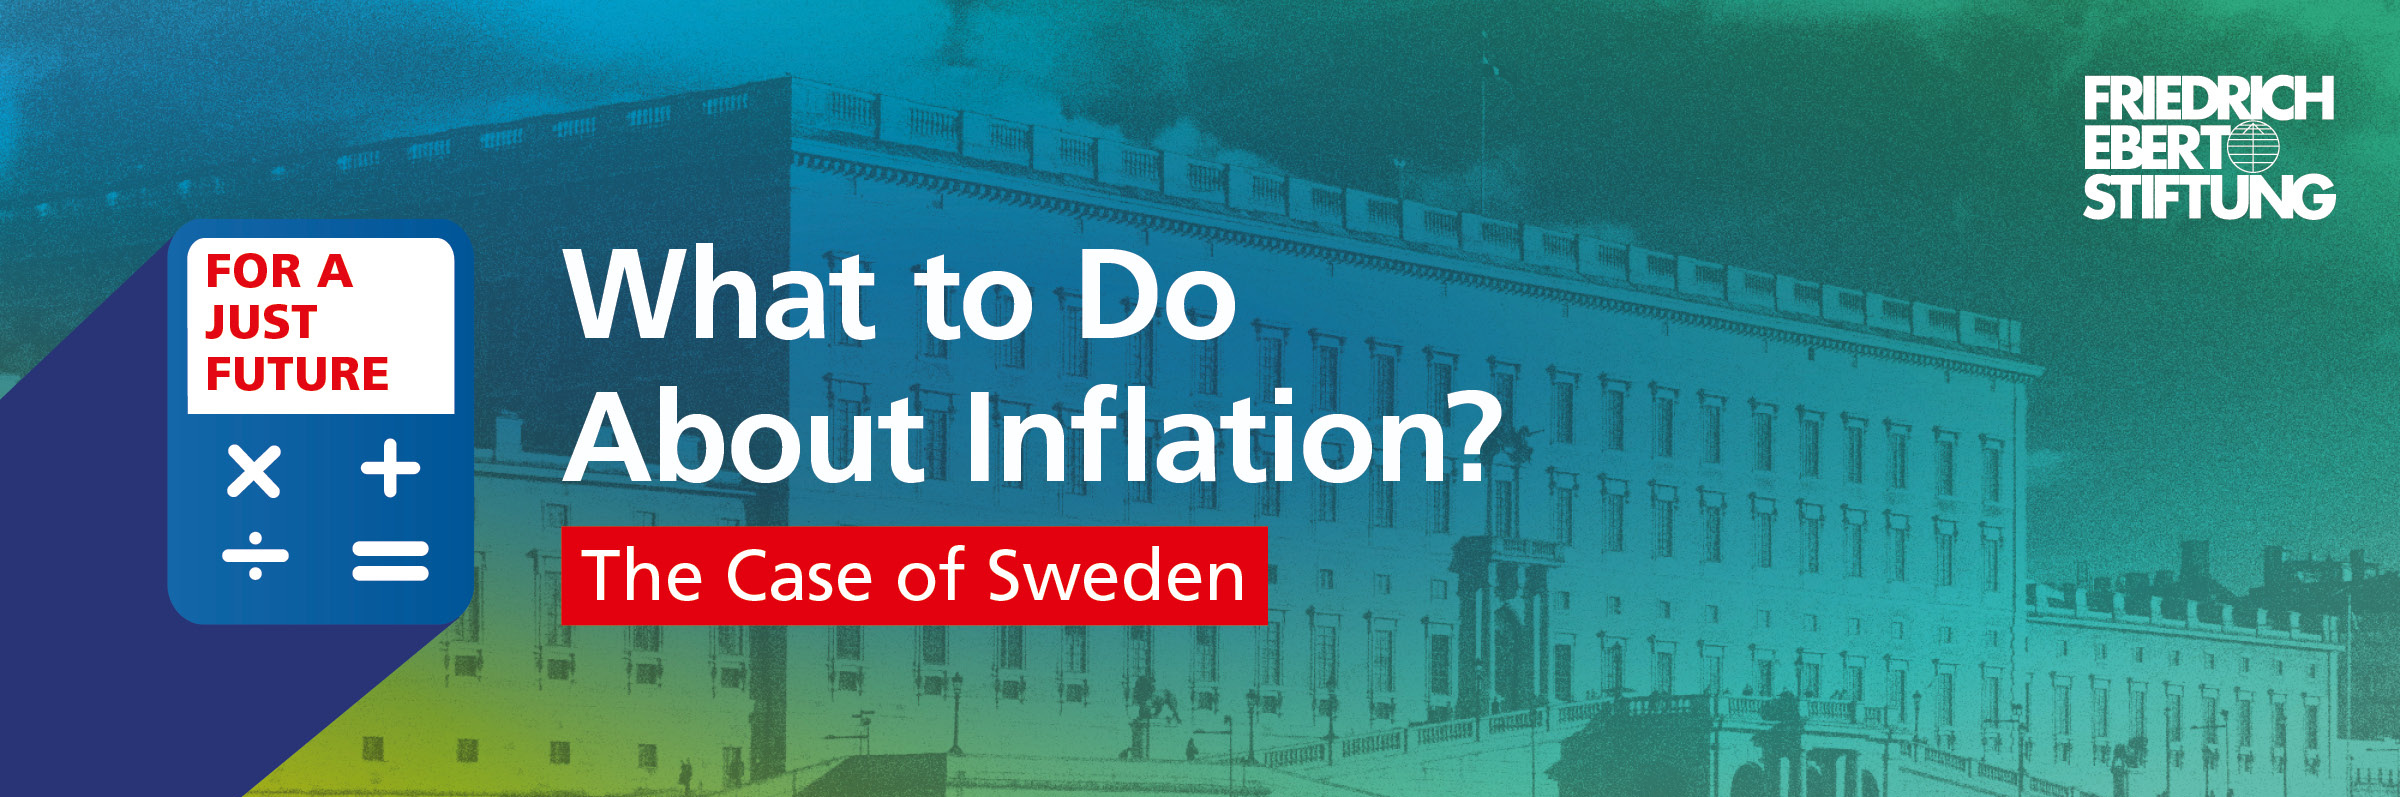 What To Do About Inflation Sweden Fes